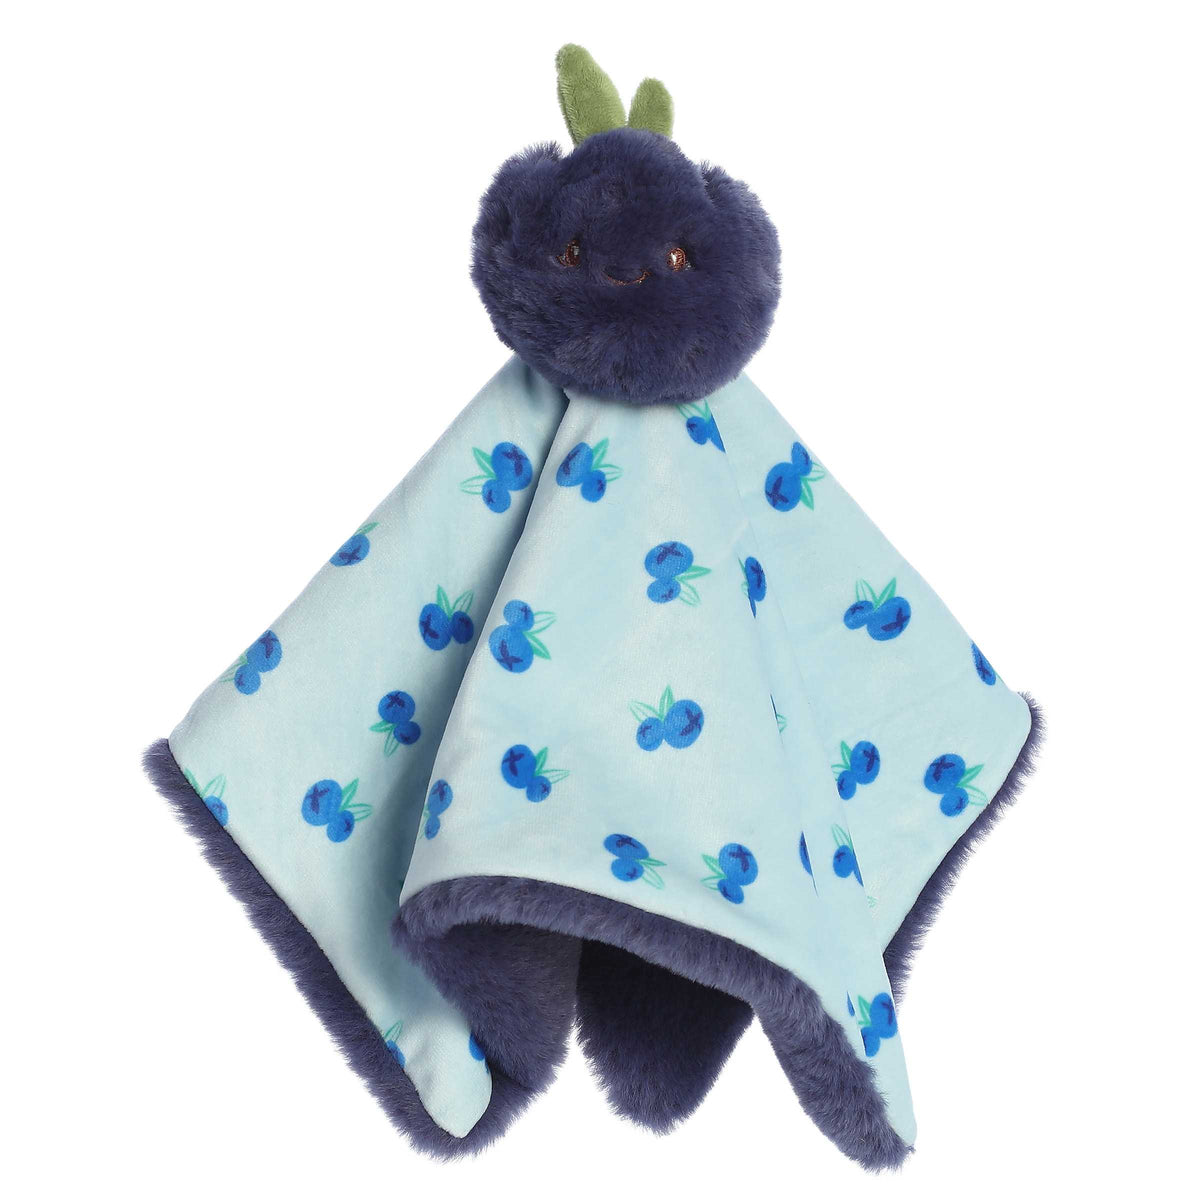 Cuddly Blueberry Plush with a purple round body and attached blue baby blanket with fruit design and fur on the back